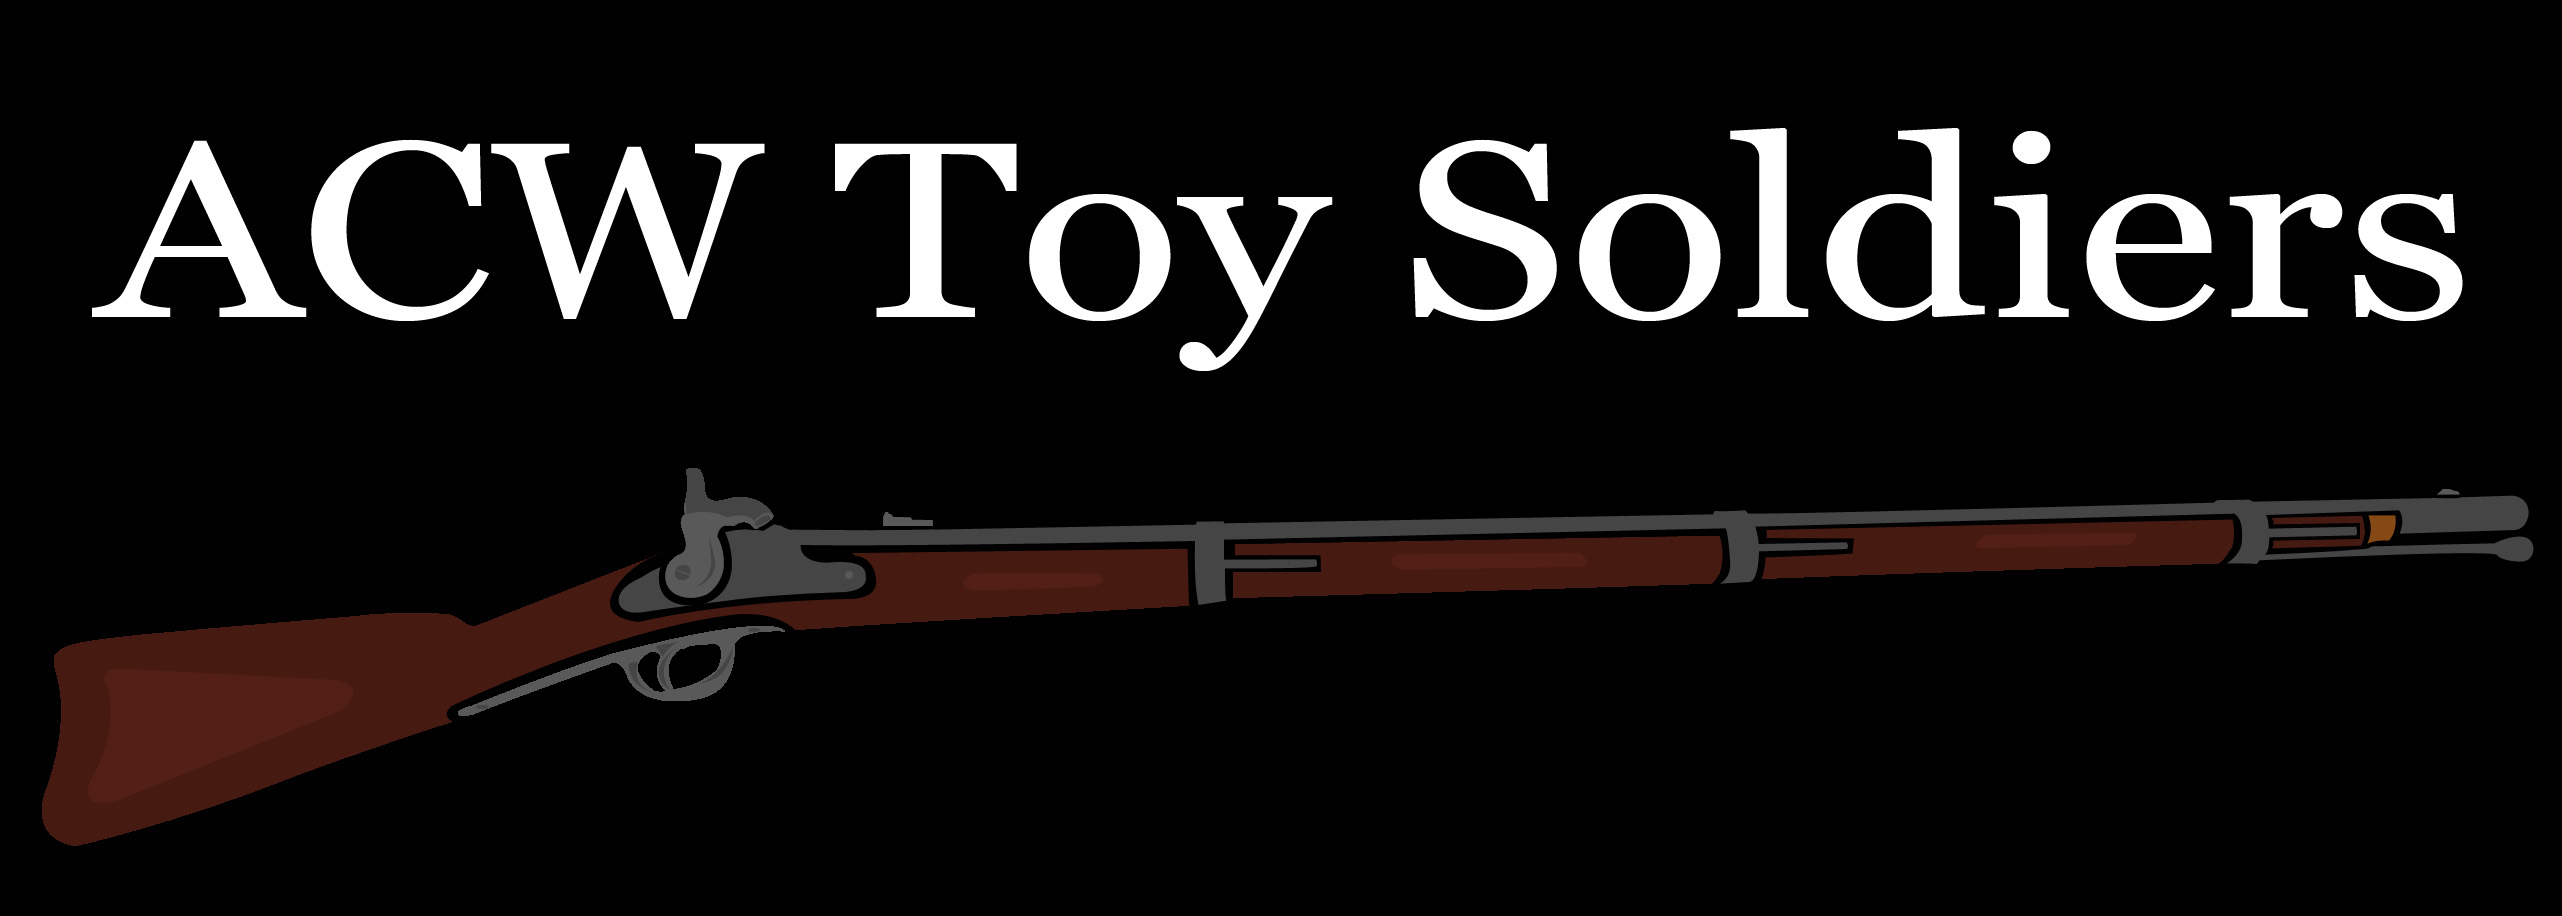 ACW Toy Soldiers logo